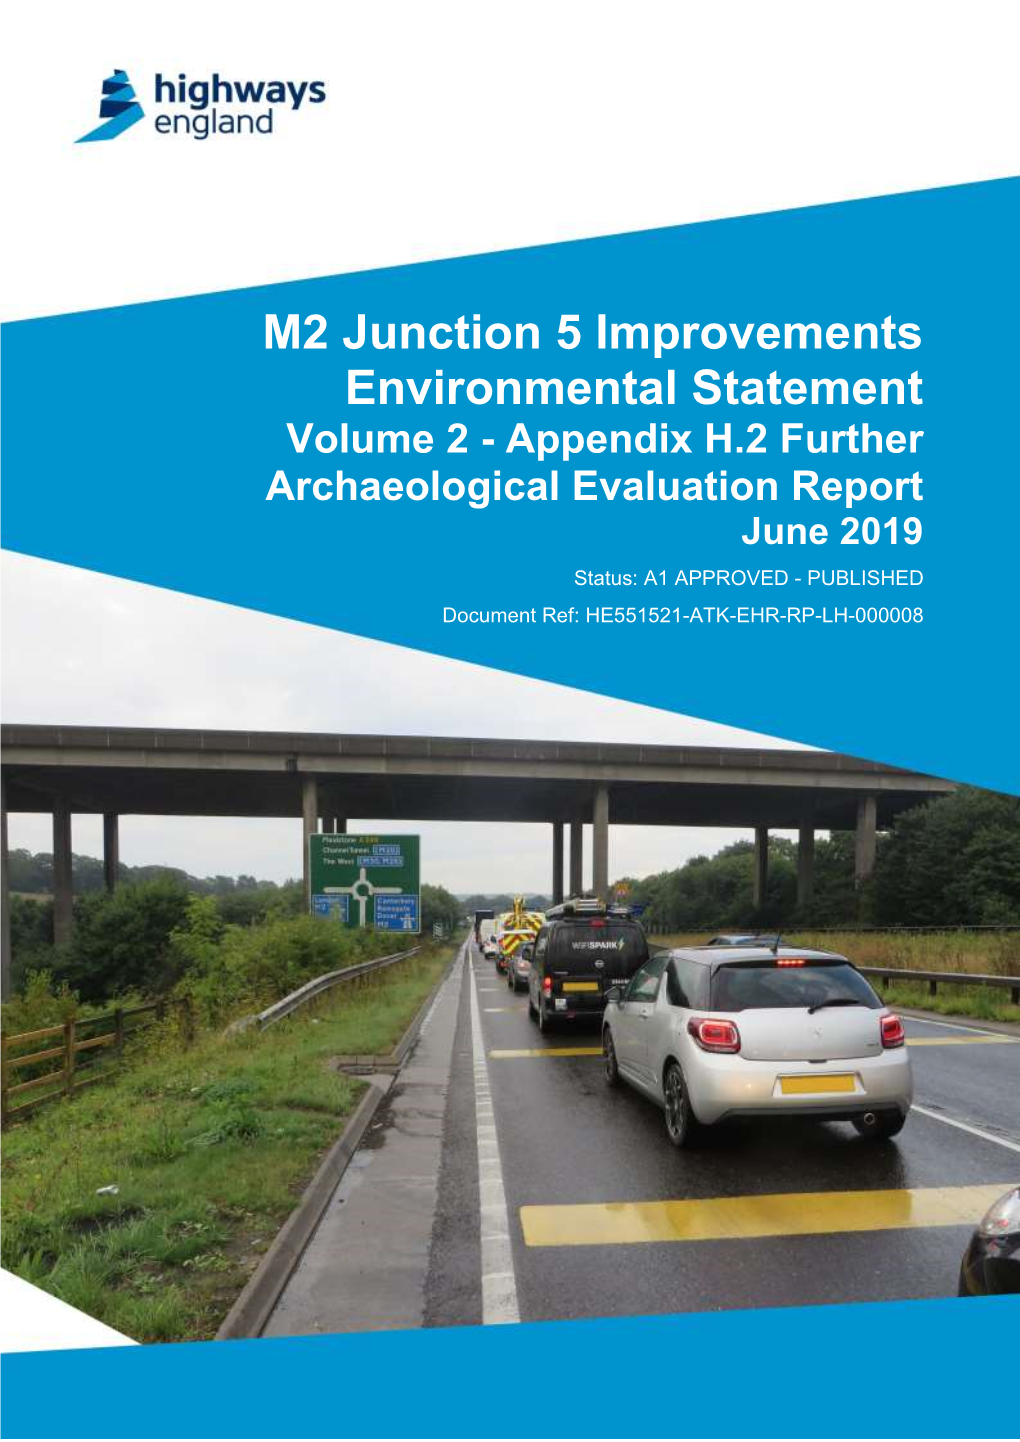 M2 Junction 5 Improvements Further Archaeological Evaluation Report